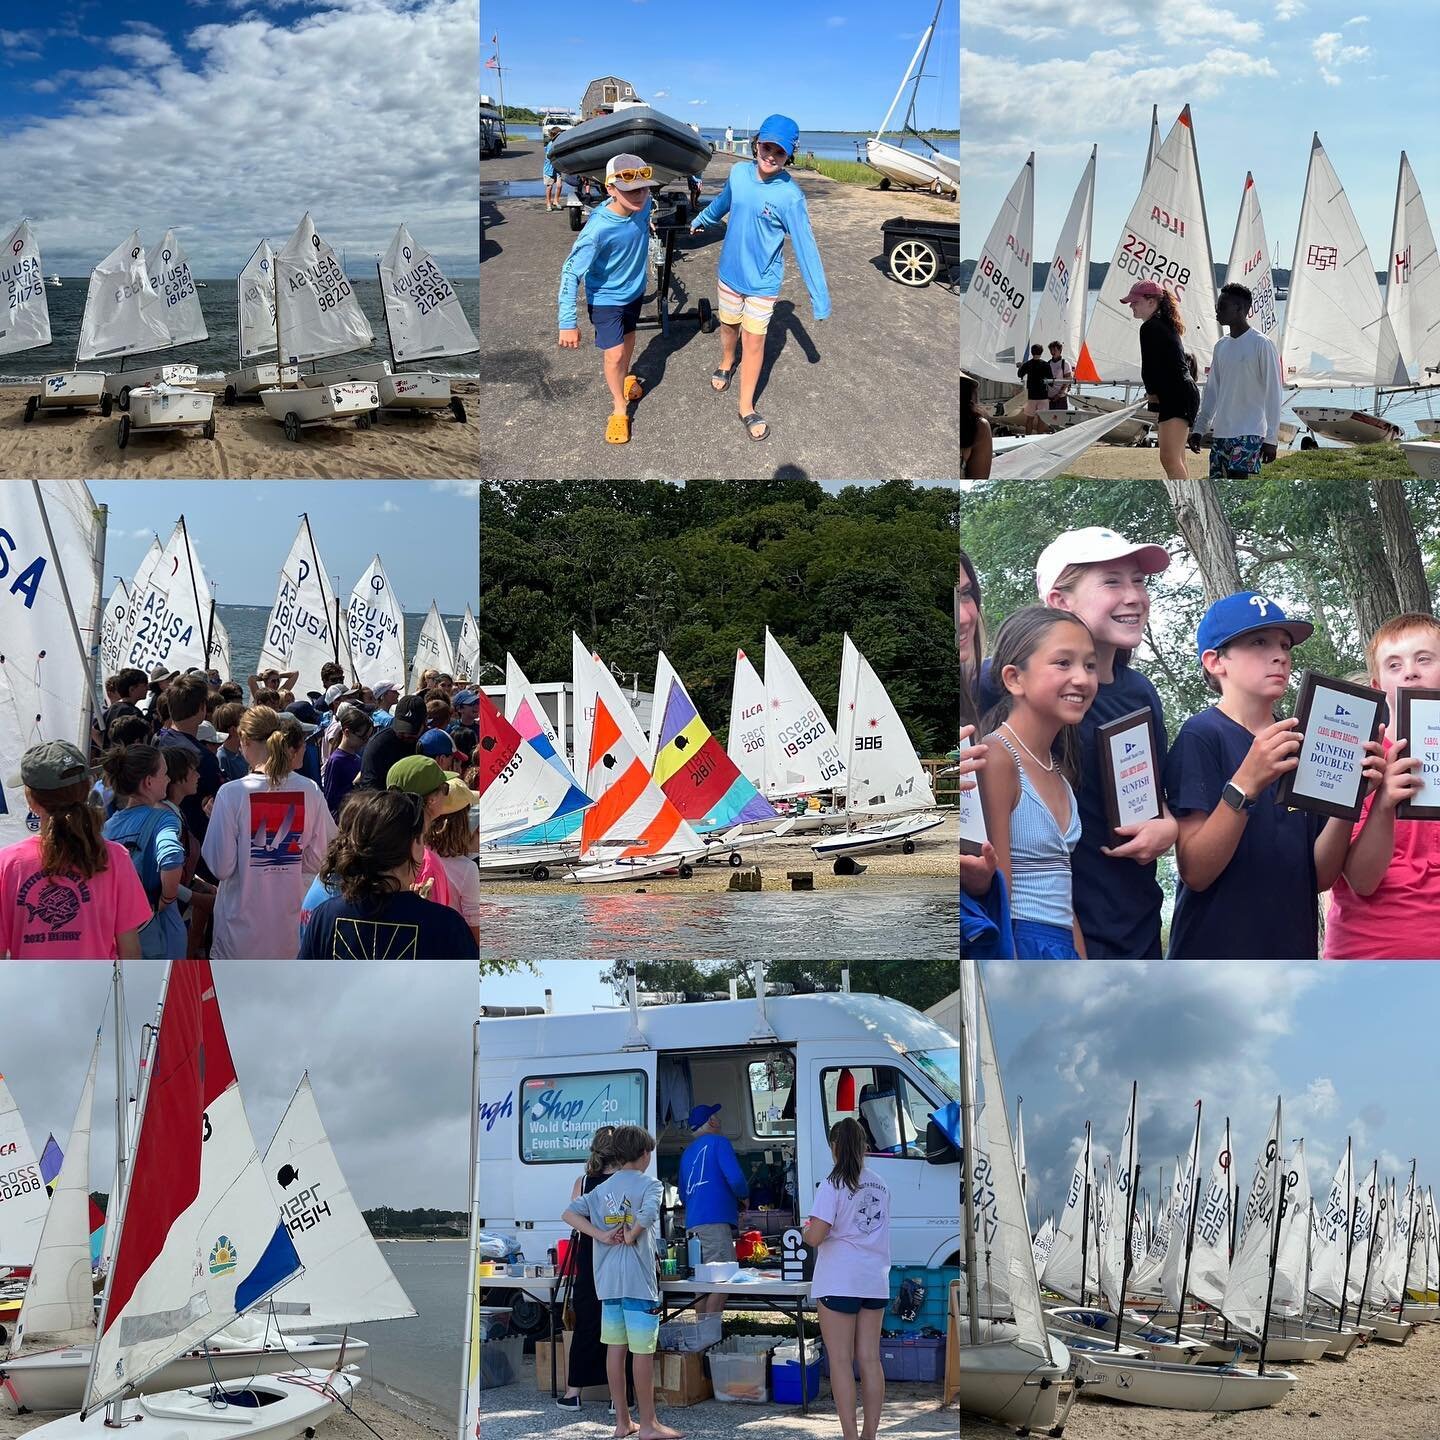 Thanks to all the PGJSA racers, host clubs, and parents who make our community what it is. Good luck to everyone racing today in the Championship. Note the late start in the NOR. #sailing #regatta #yothsailing #summer